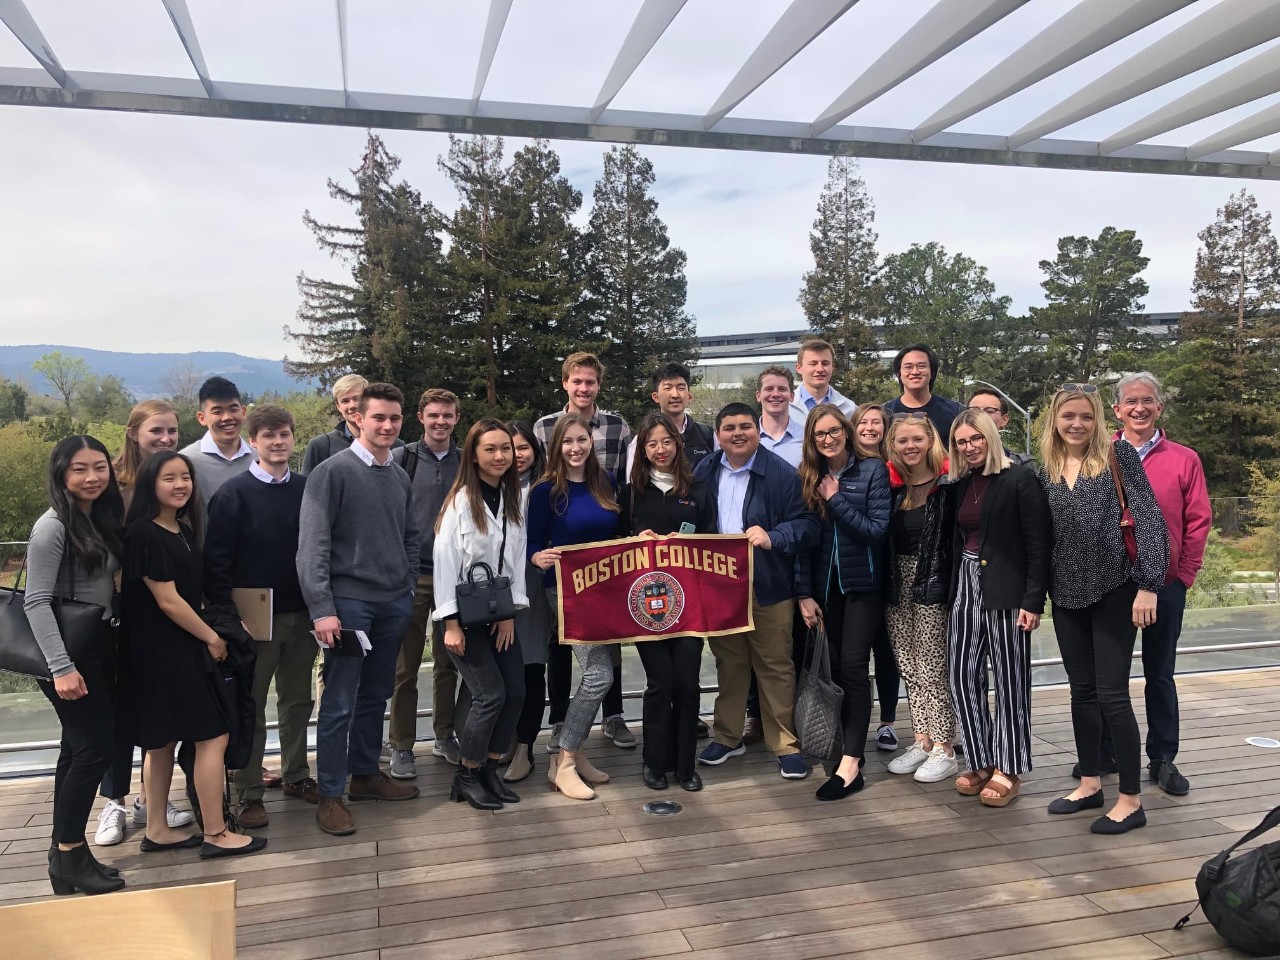 group photo of students holding boston college banner on a patio